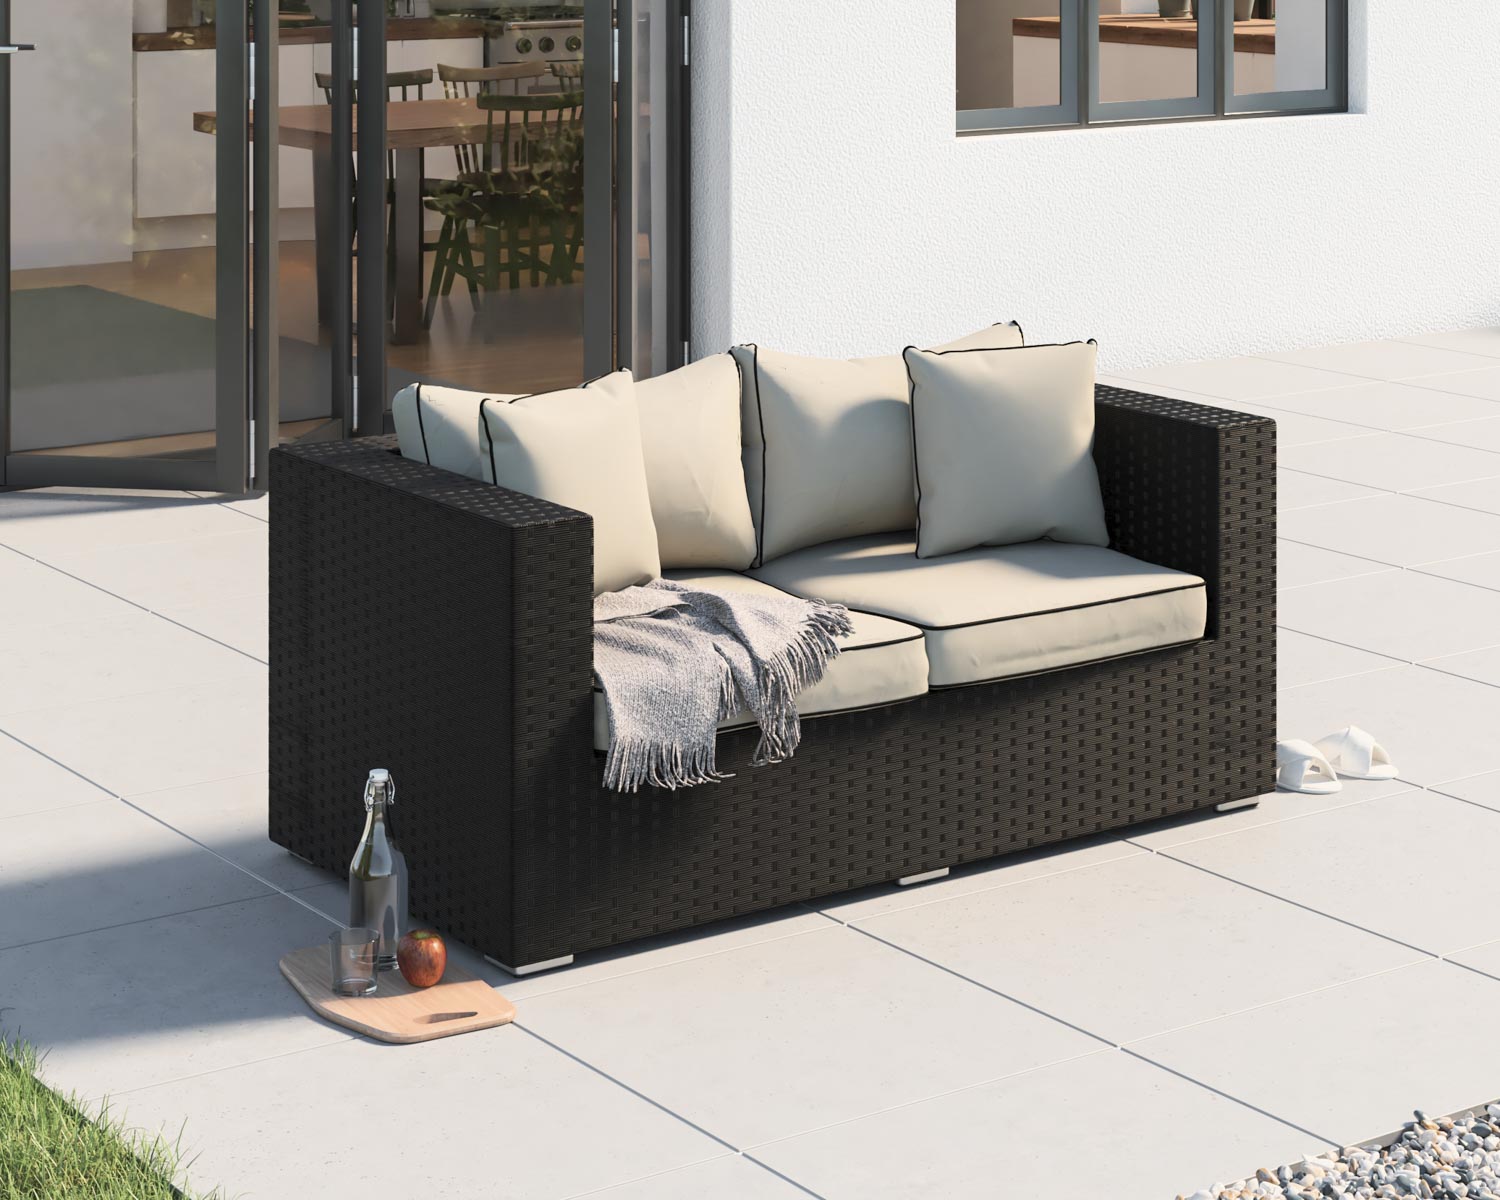 2 Seater Rattan Garden Sofa in Black With White Cushions - Ascot - Rattan Direct